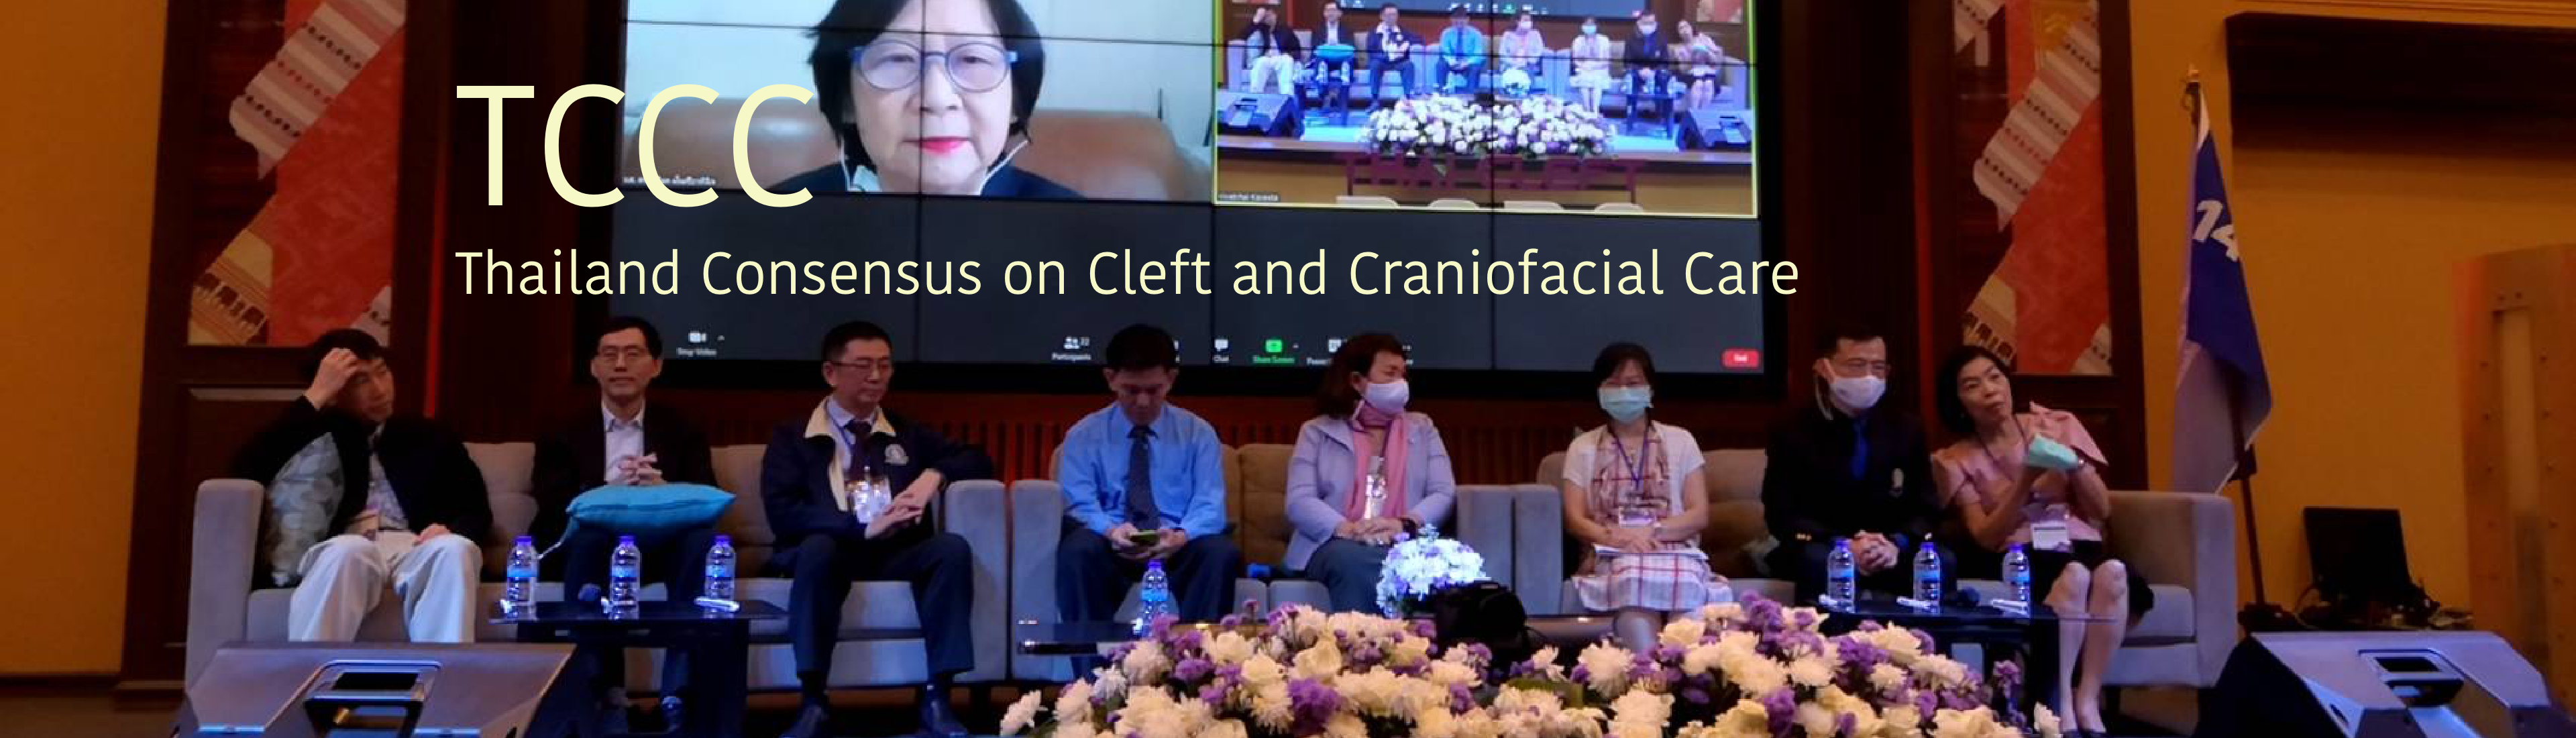 Thailand Consensus on Cleft and Craniofacial Care